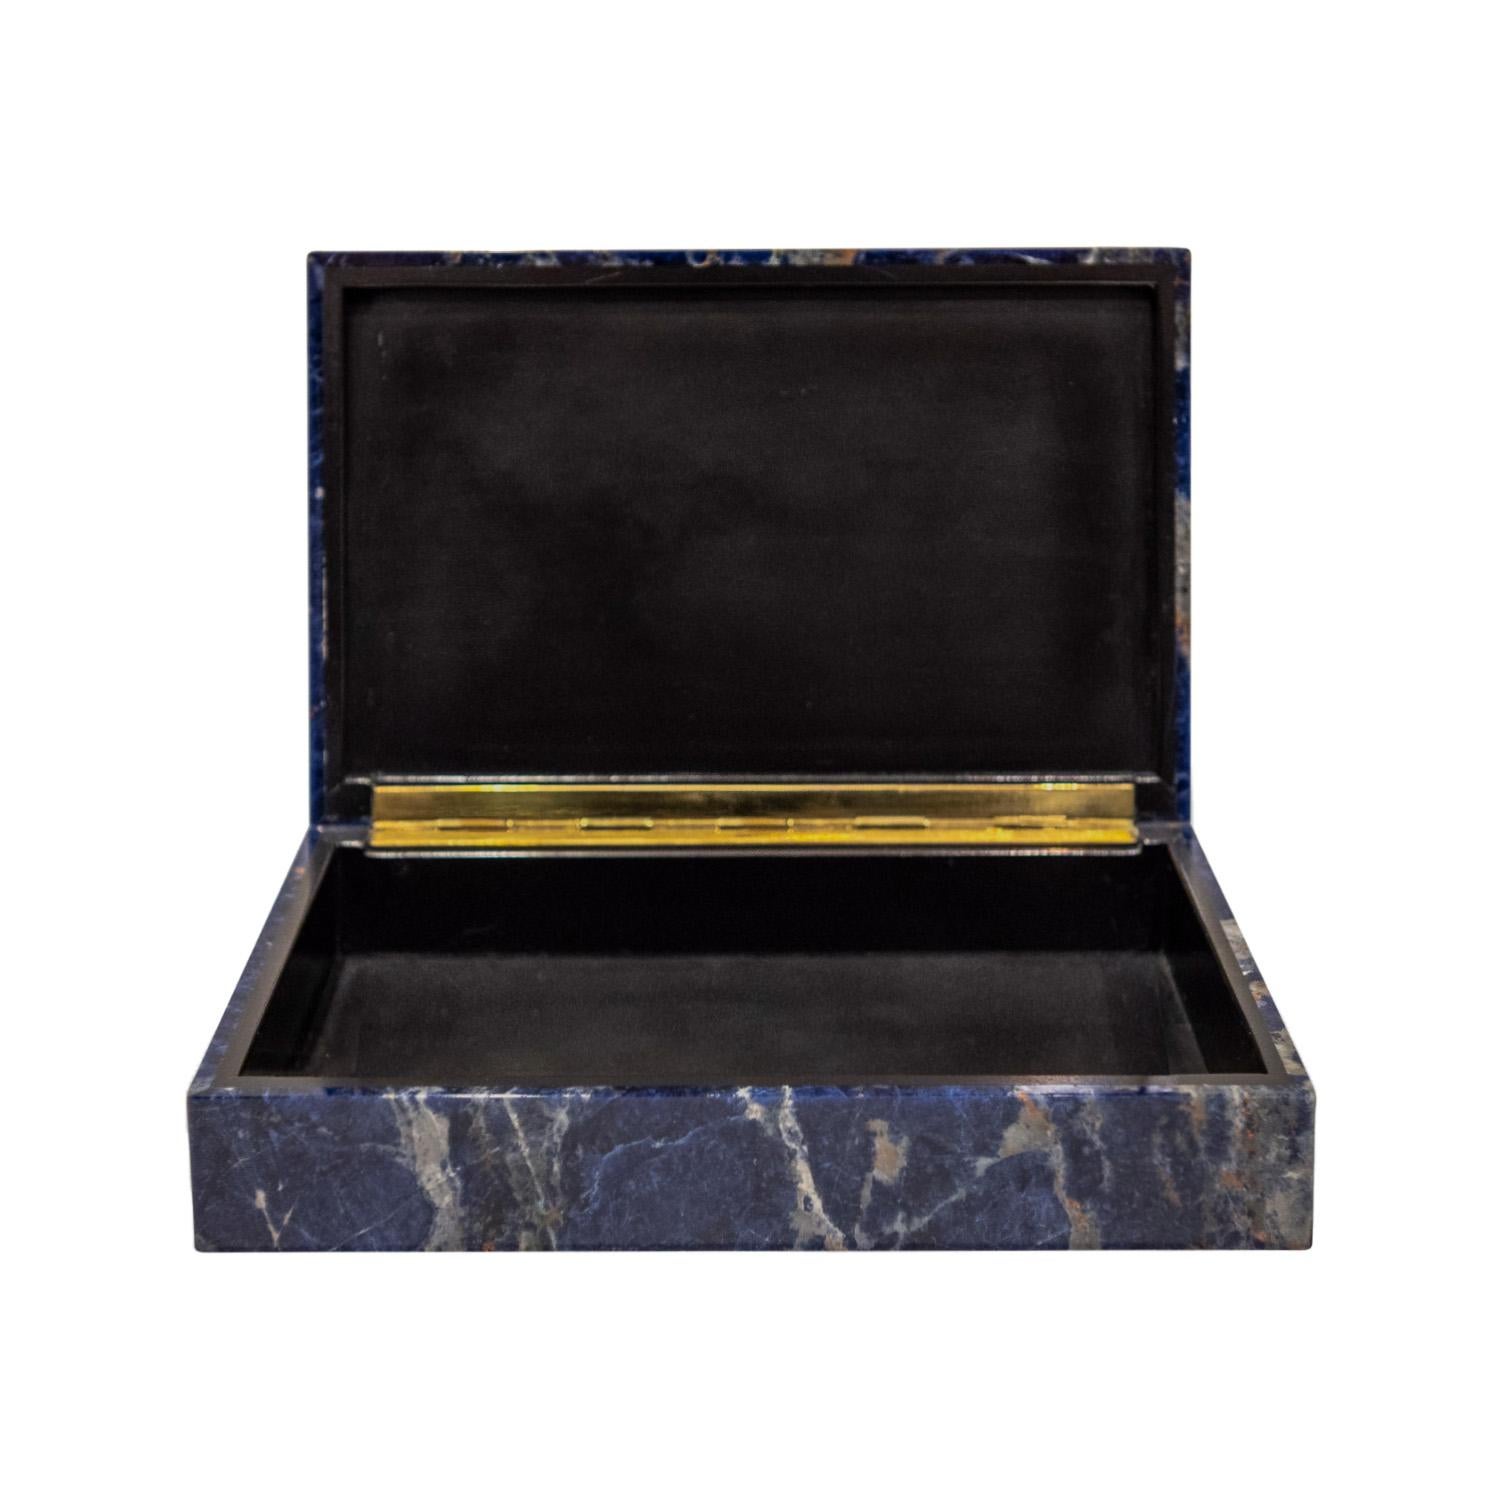 American Karl Springer Unique Hinged Box in Polished Sodalite Stone 1980s 'Signed' For Sale